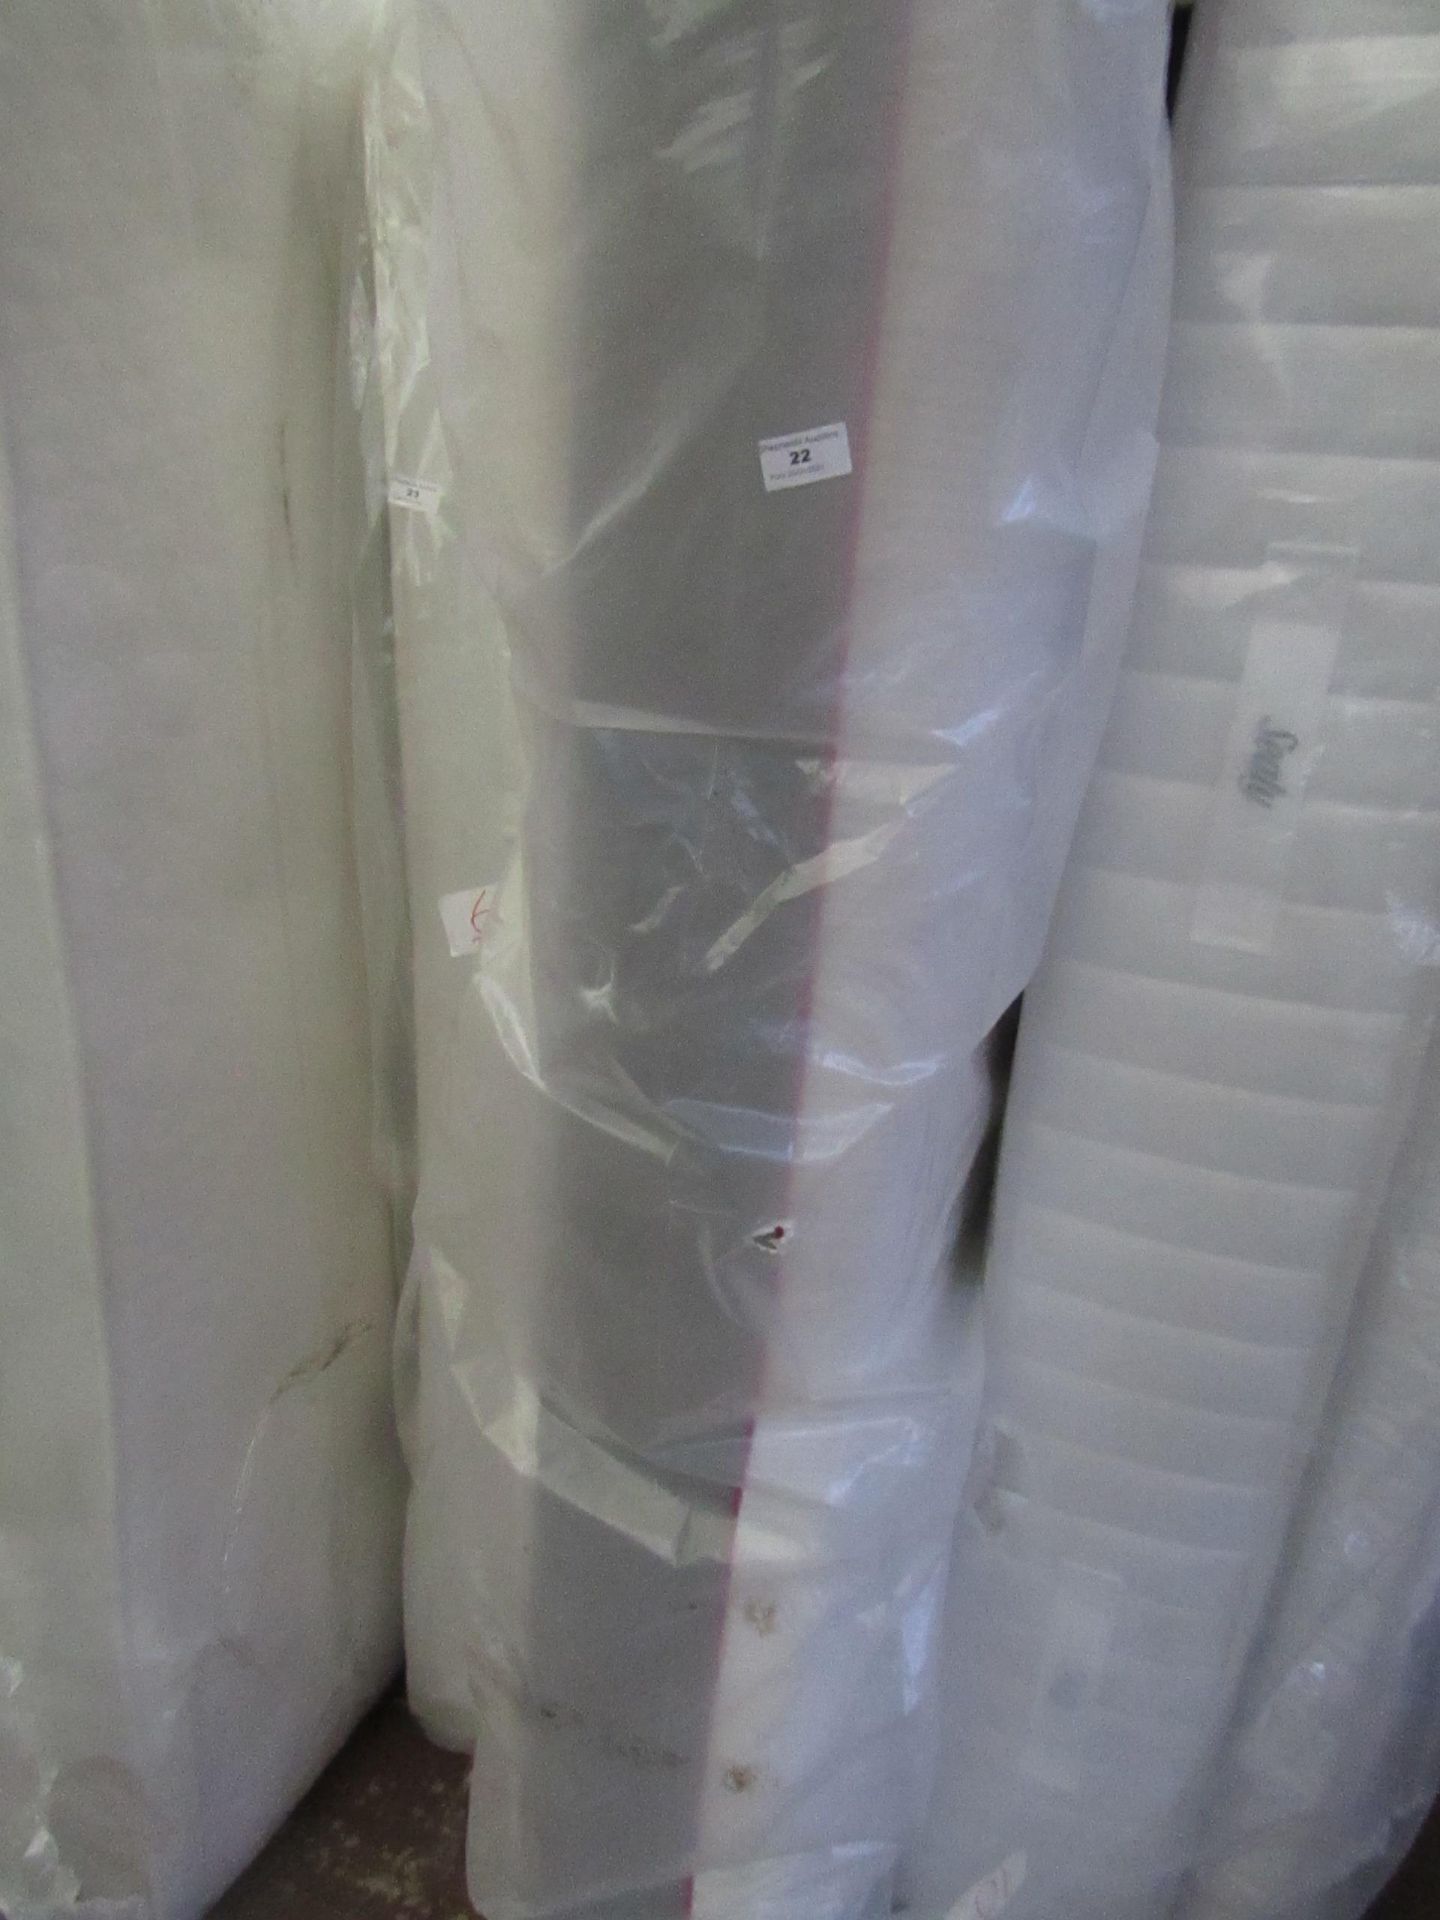 | 1X | BELLA HYBRID SUPER KING SIZE MATTRESS | EXDISPLAY MAY HAVE MARKS | RRP £699 |